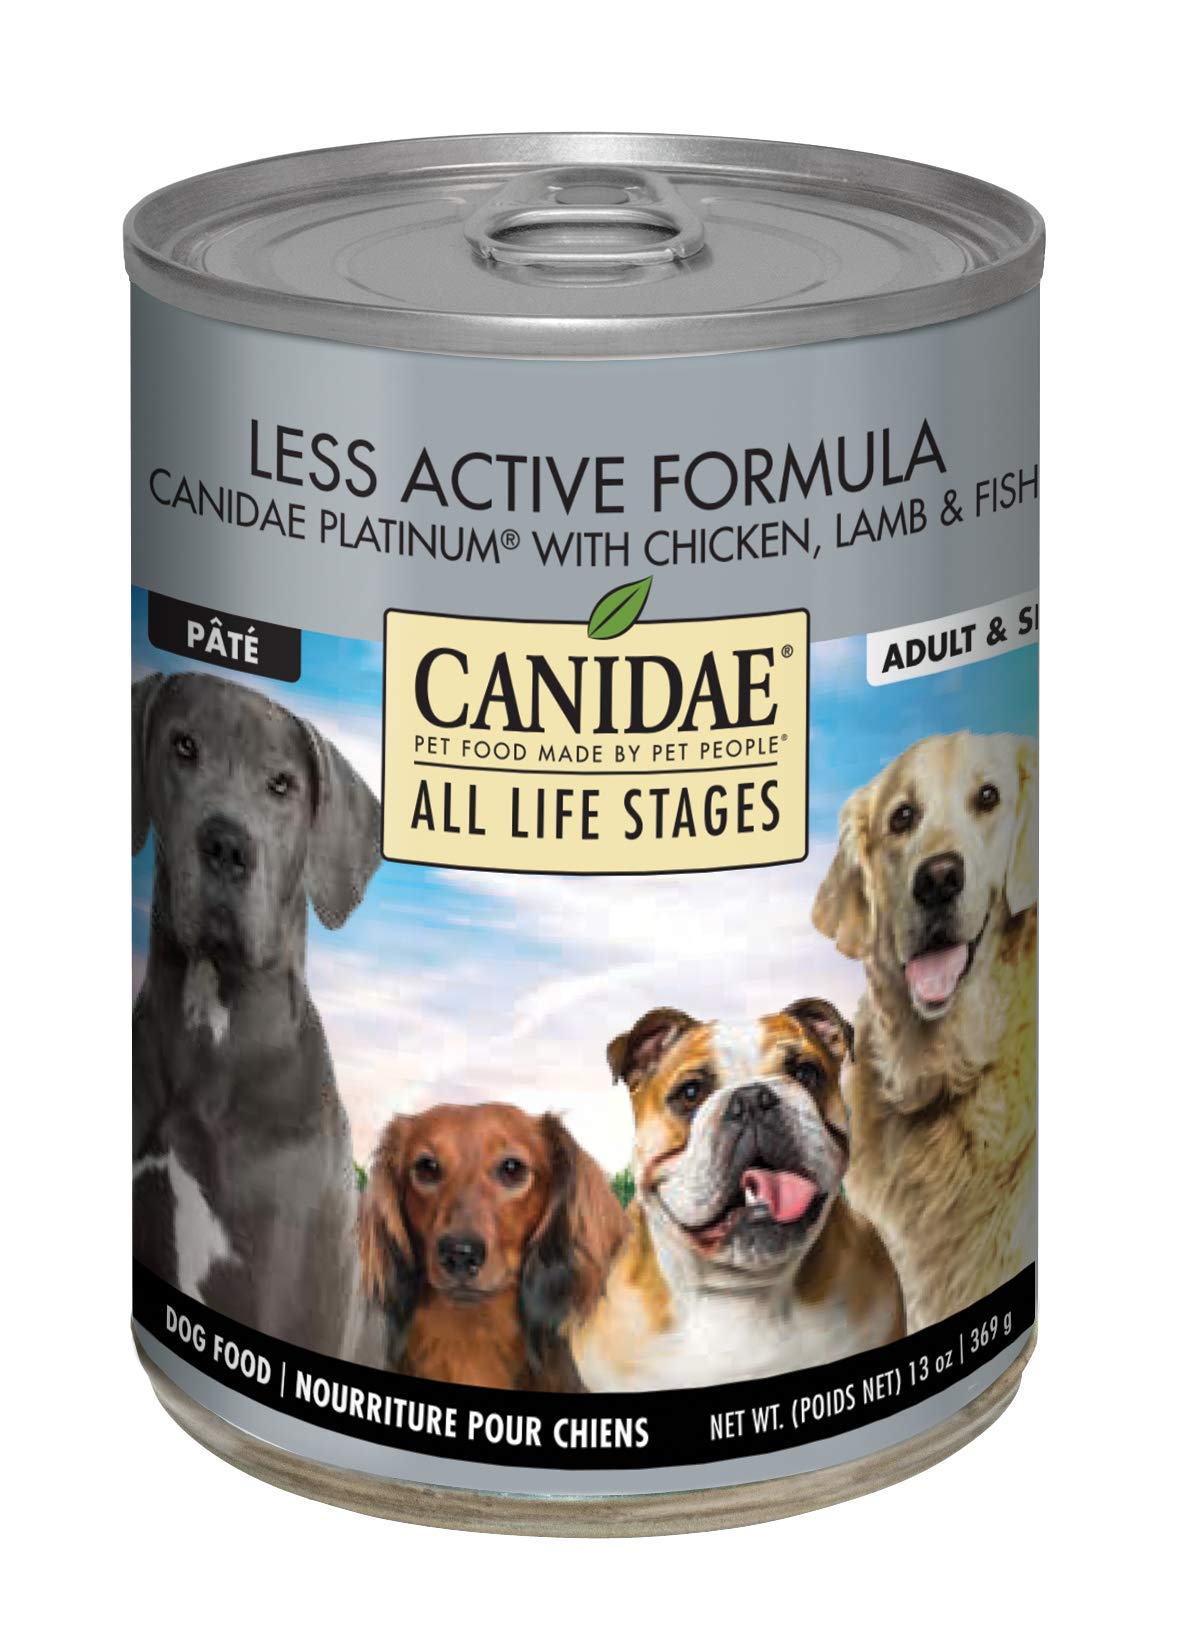 CanidaeLife Stages Canned Dog Food For Puppies, Adults & Seniors, 12 Pack